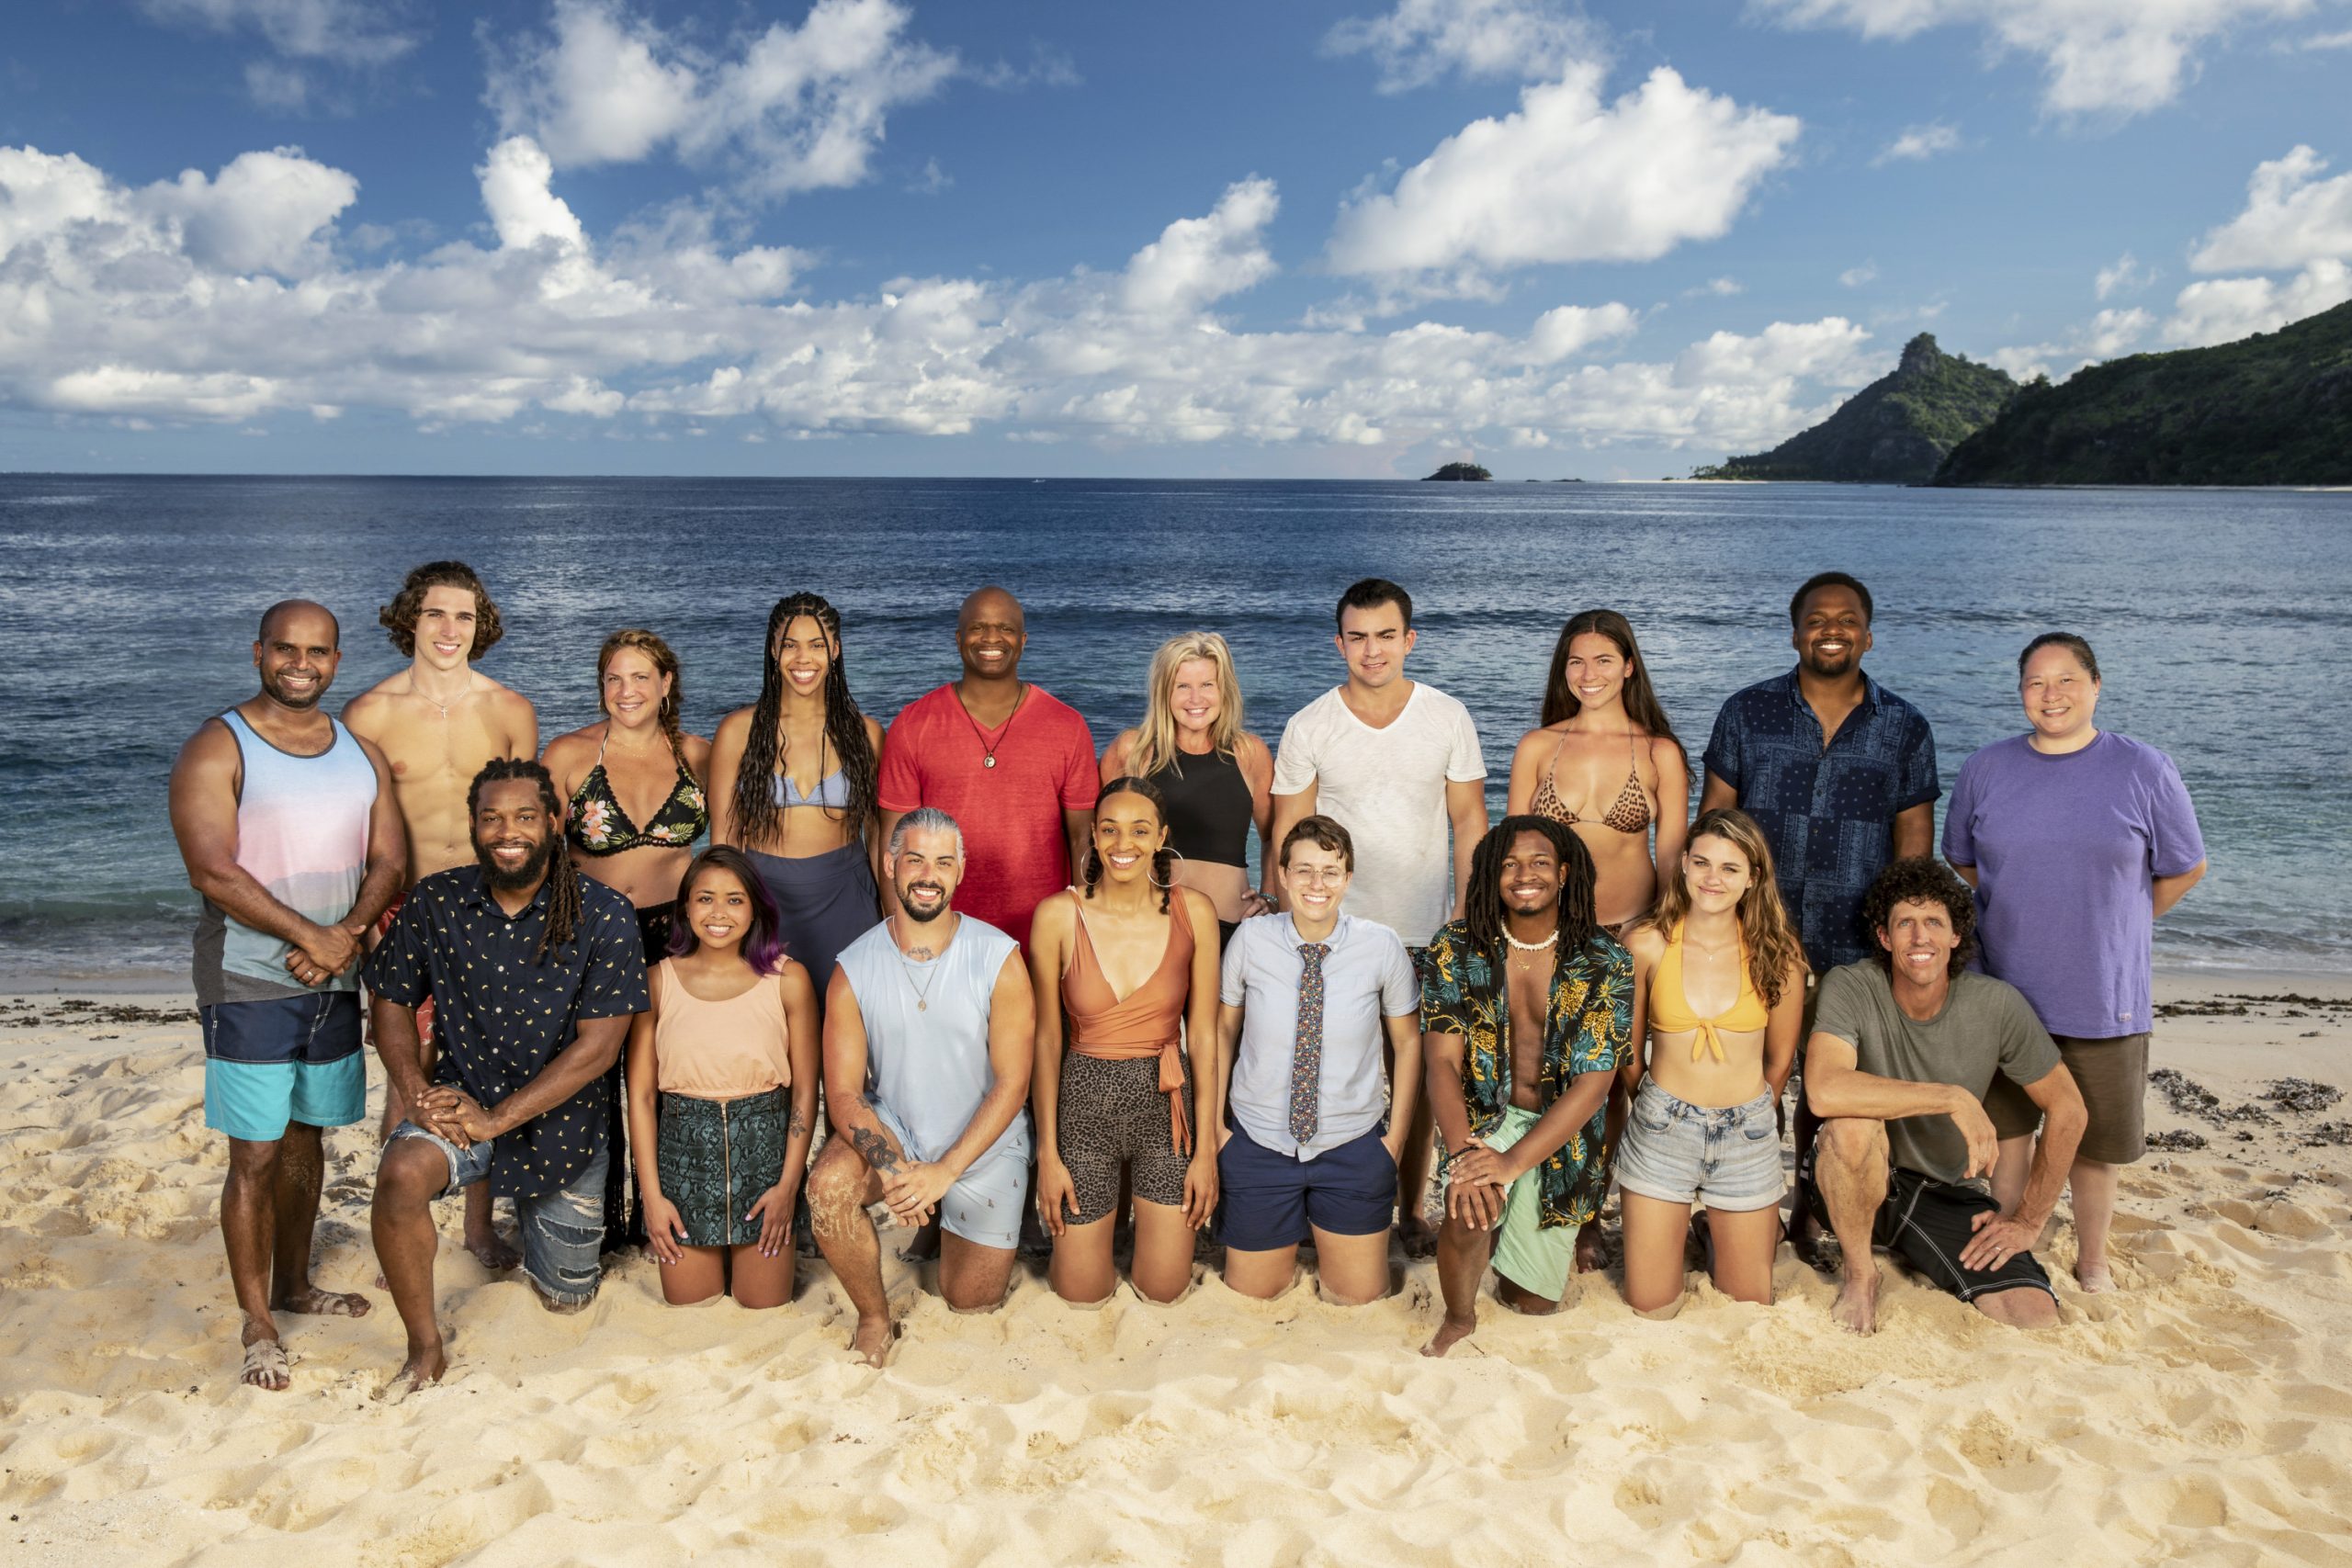 ‘Survivor’ Season 41: Fans Speculate That 1 Contestant Will Be Medevaced in an Upcoming Episode